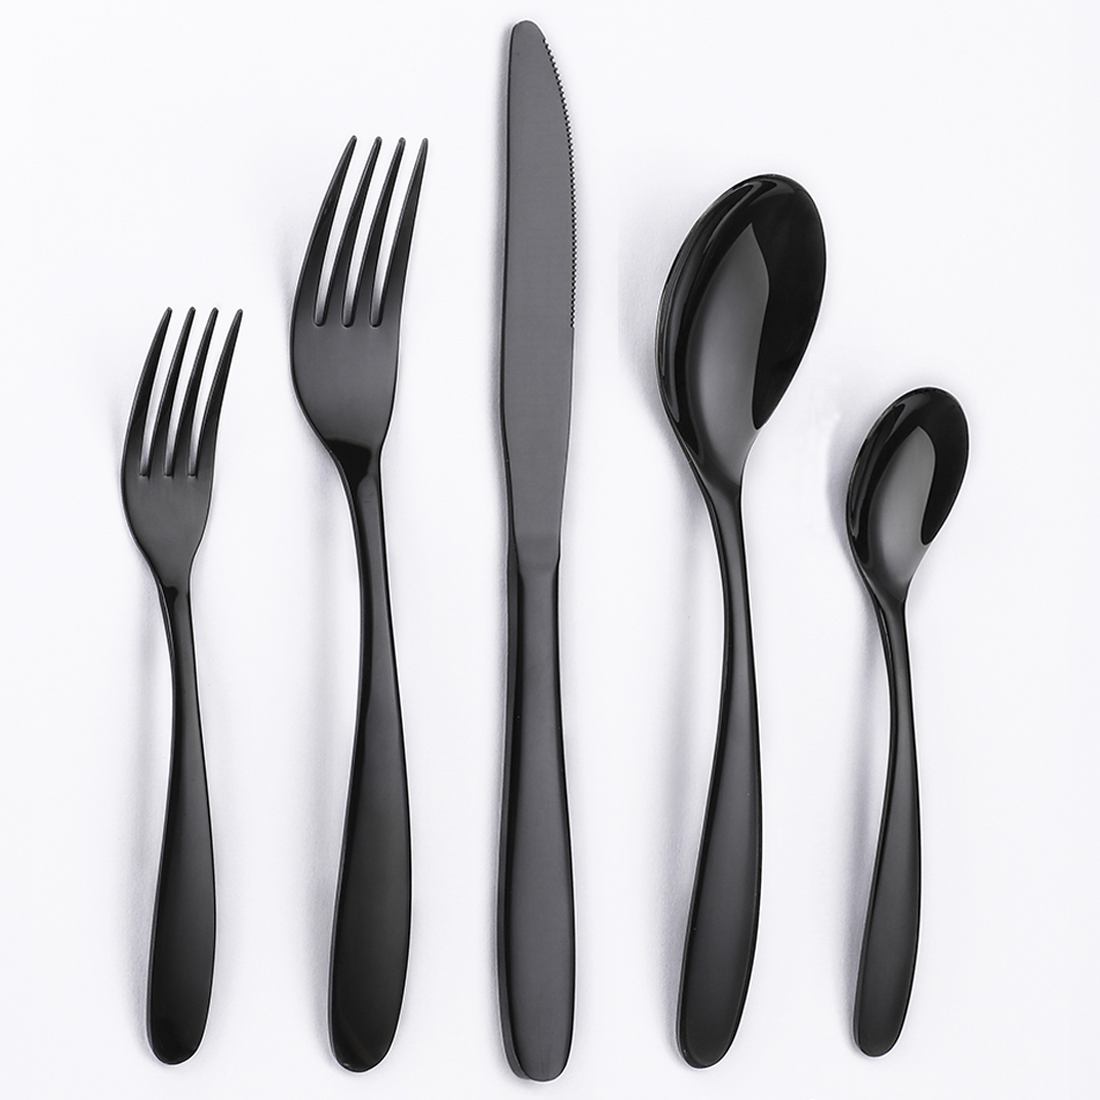 Silverware Sets, JOW 20 Pieces Stainless Steel Flatware Set Service for 4, Tableware Cutlery Set for Home and Restaurant, Knives Forks Spoons, Mirror Polished, Dishwasher Safe (Black) - image 1 of 15